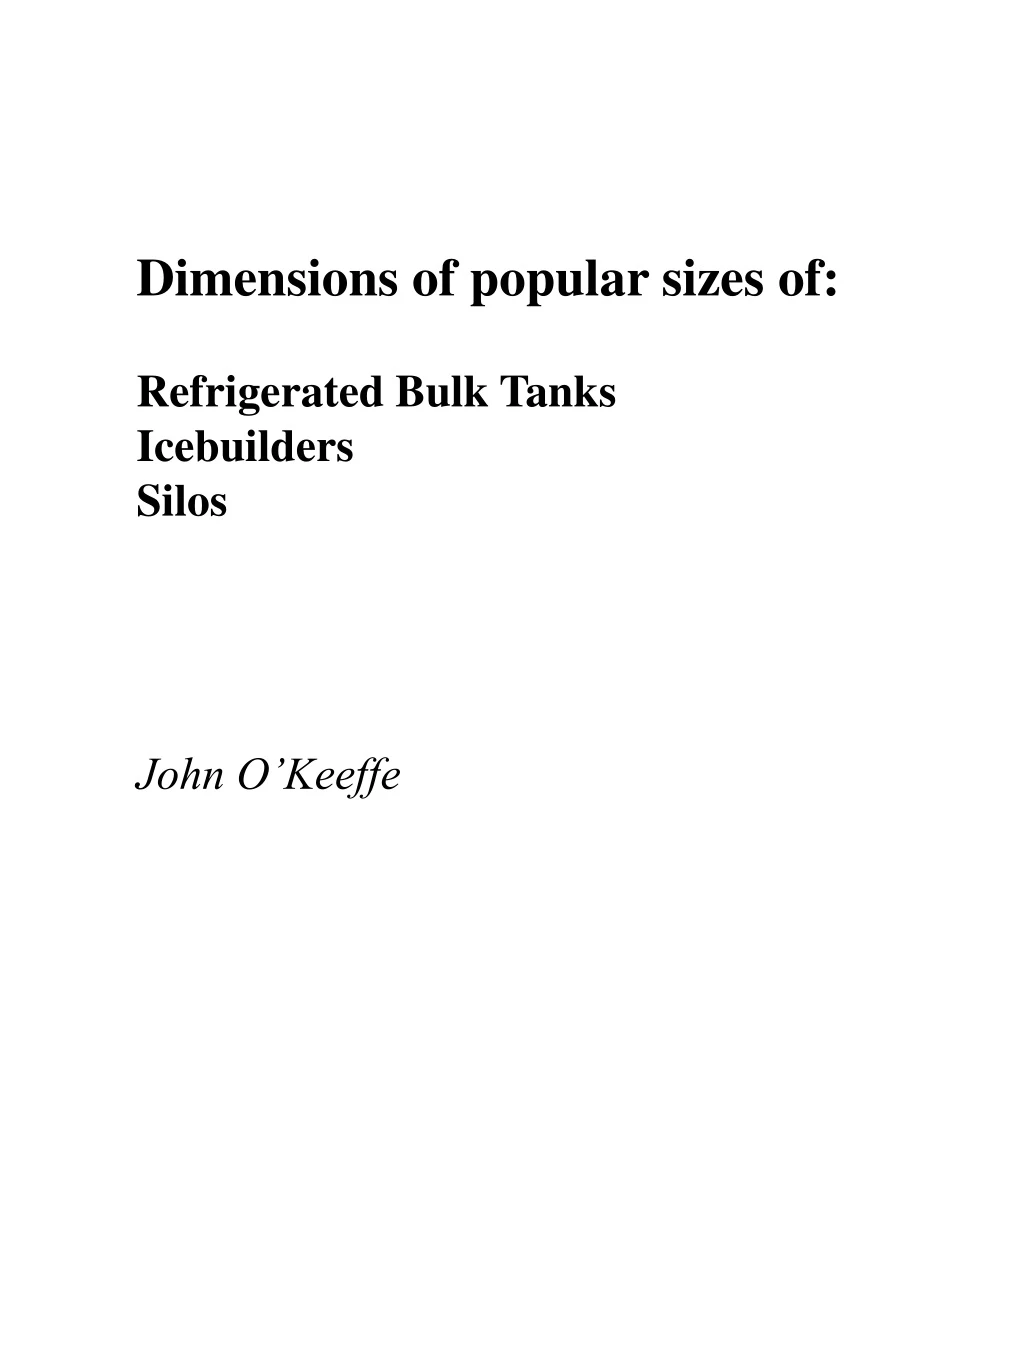 dimensions of popular sizes of refrigerated bulk